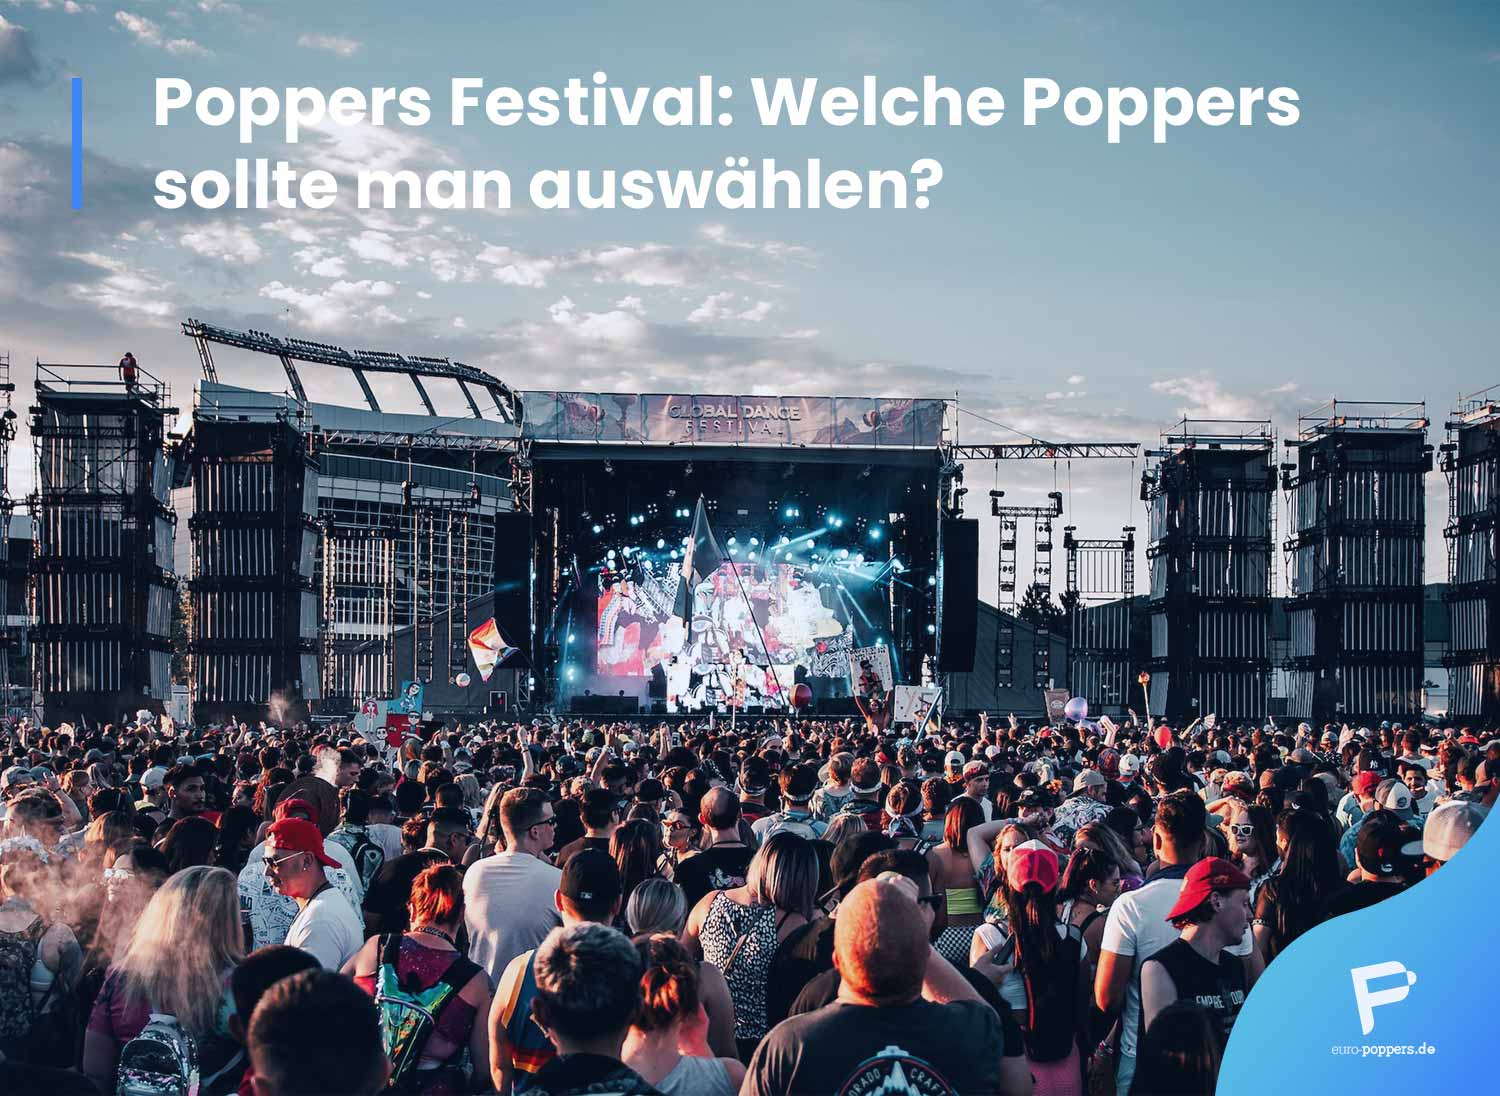 You are currently viewing Poppers Festival: Welche Poppers sollte man auswählen?